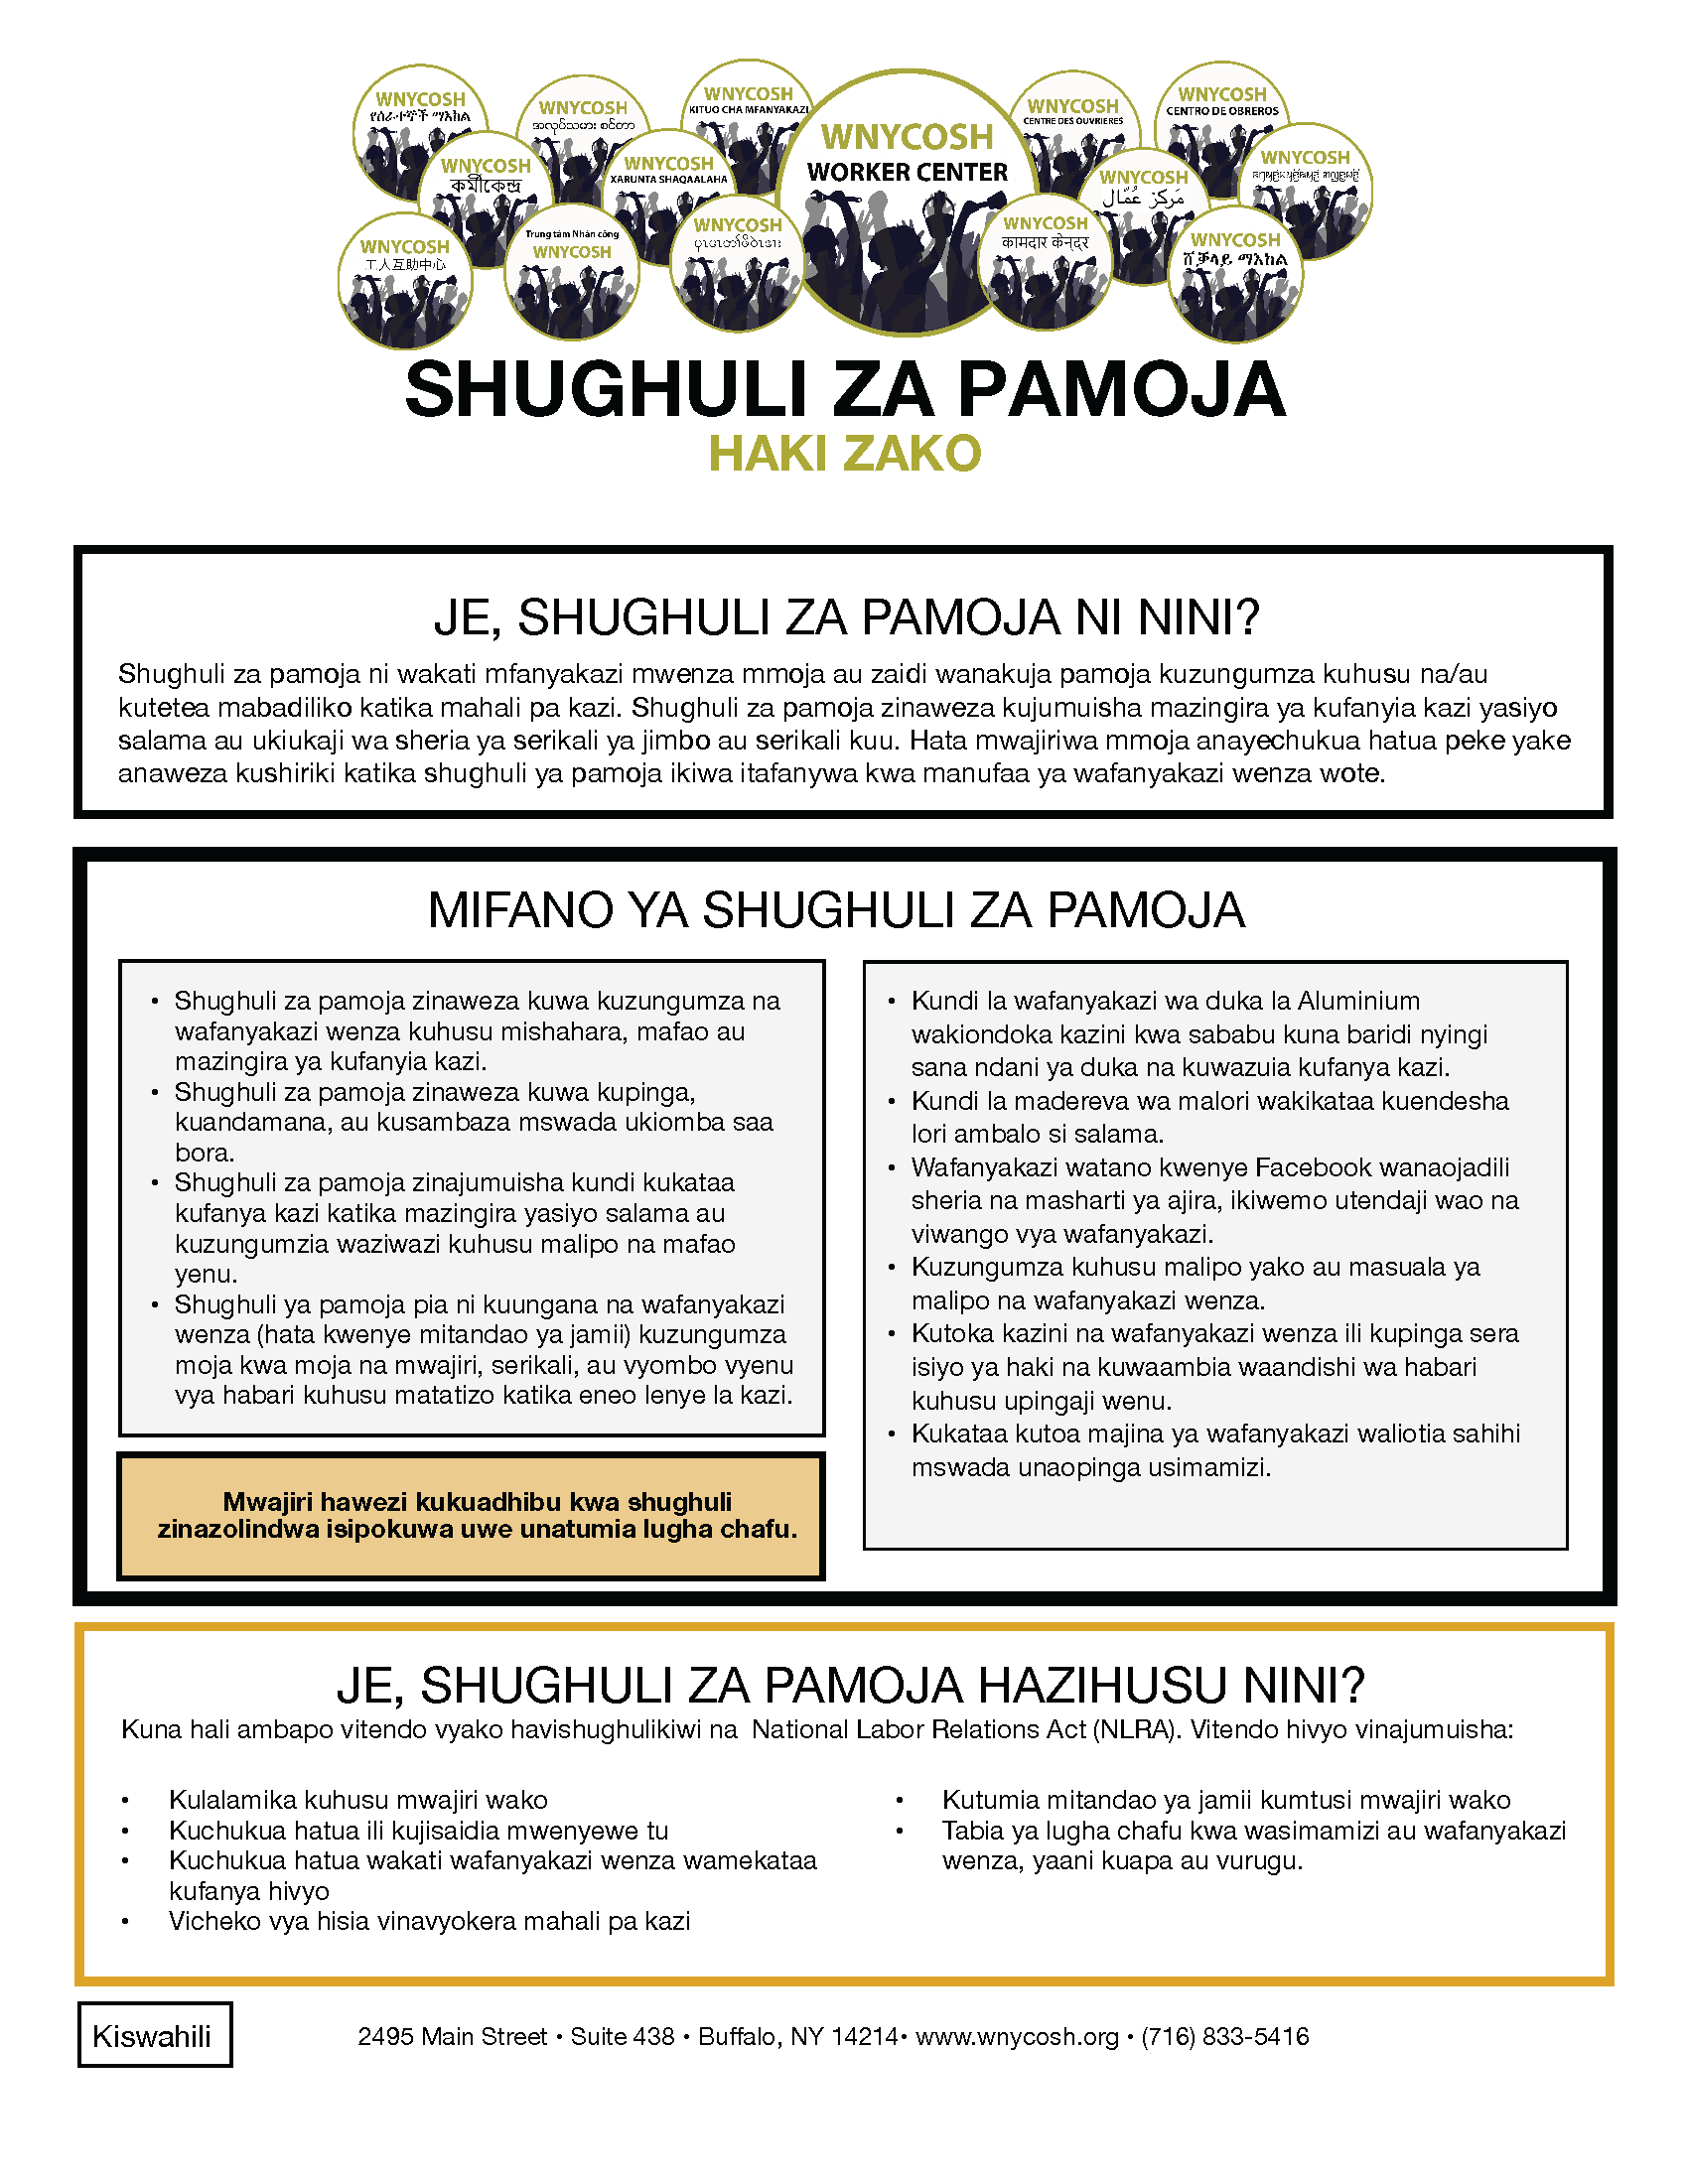 Thumbnail for Concerted Activity Factsheet in Swahili